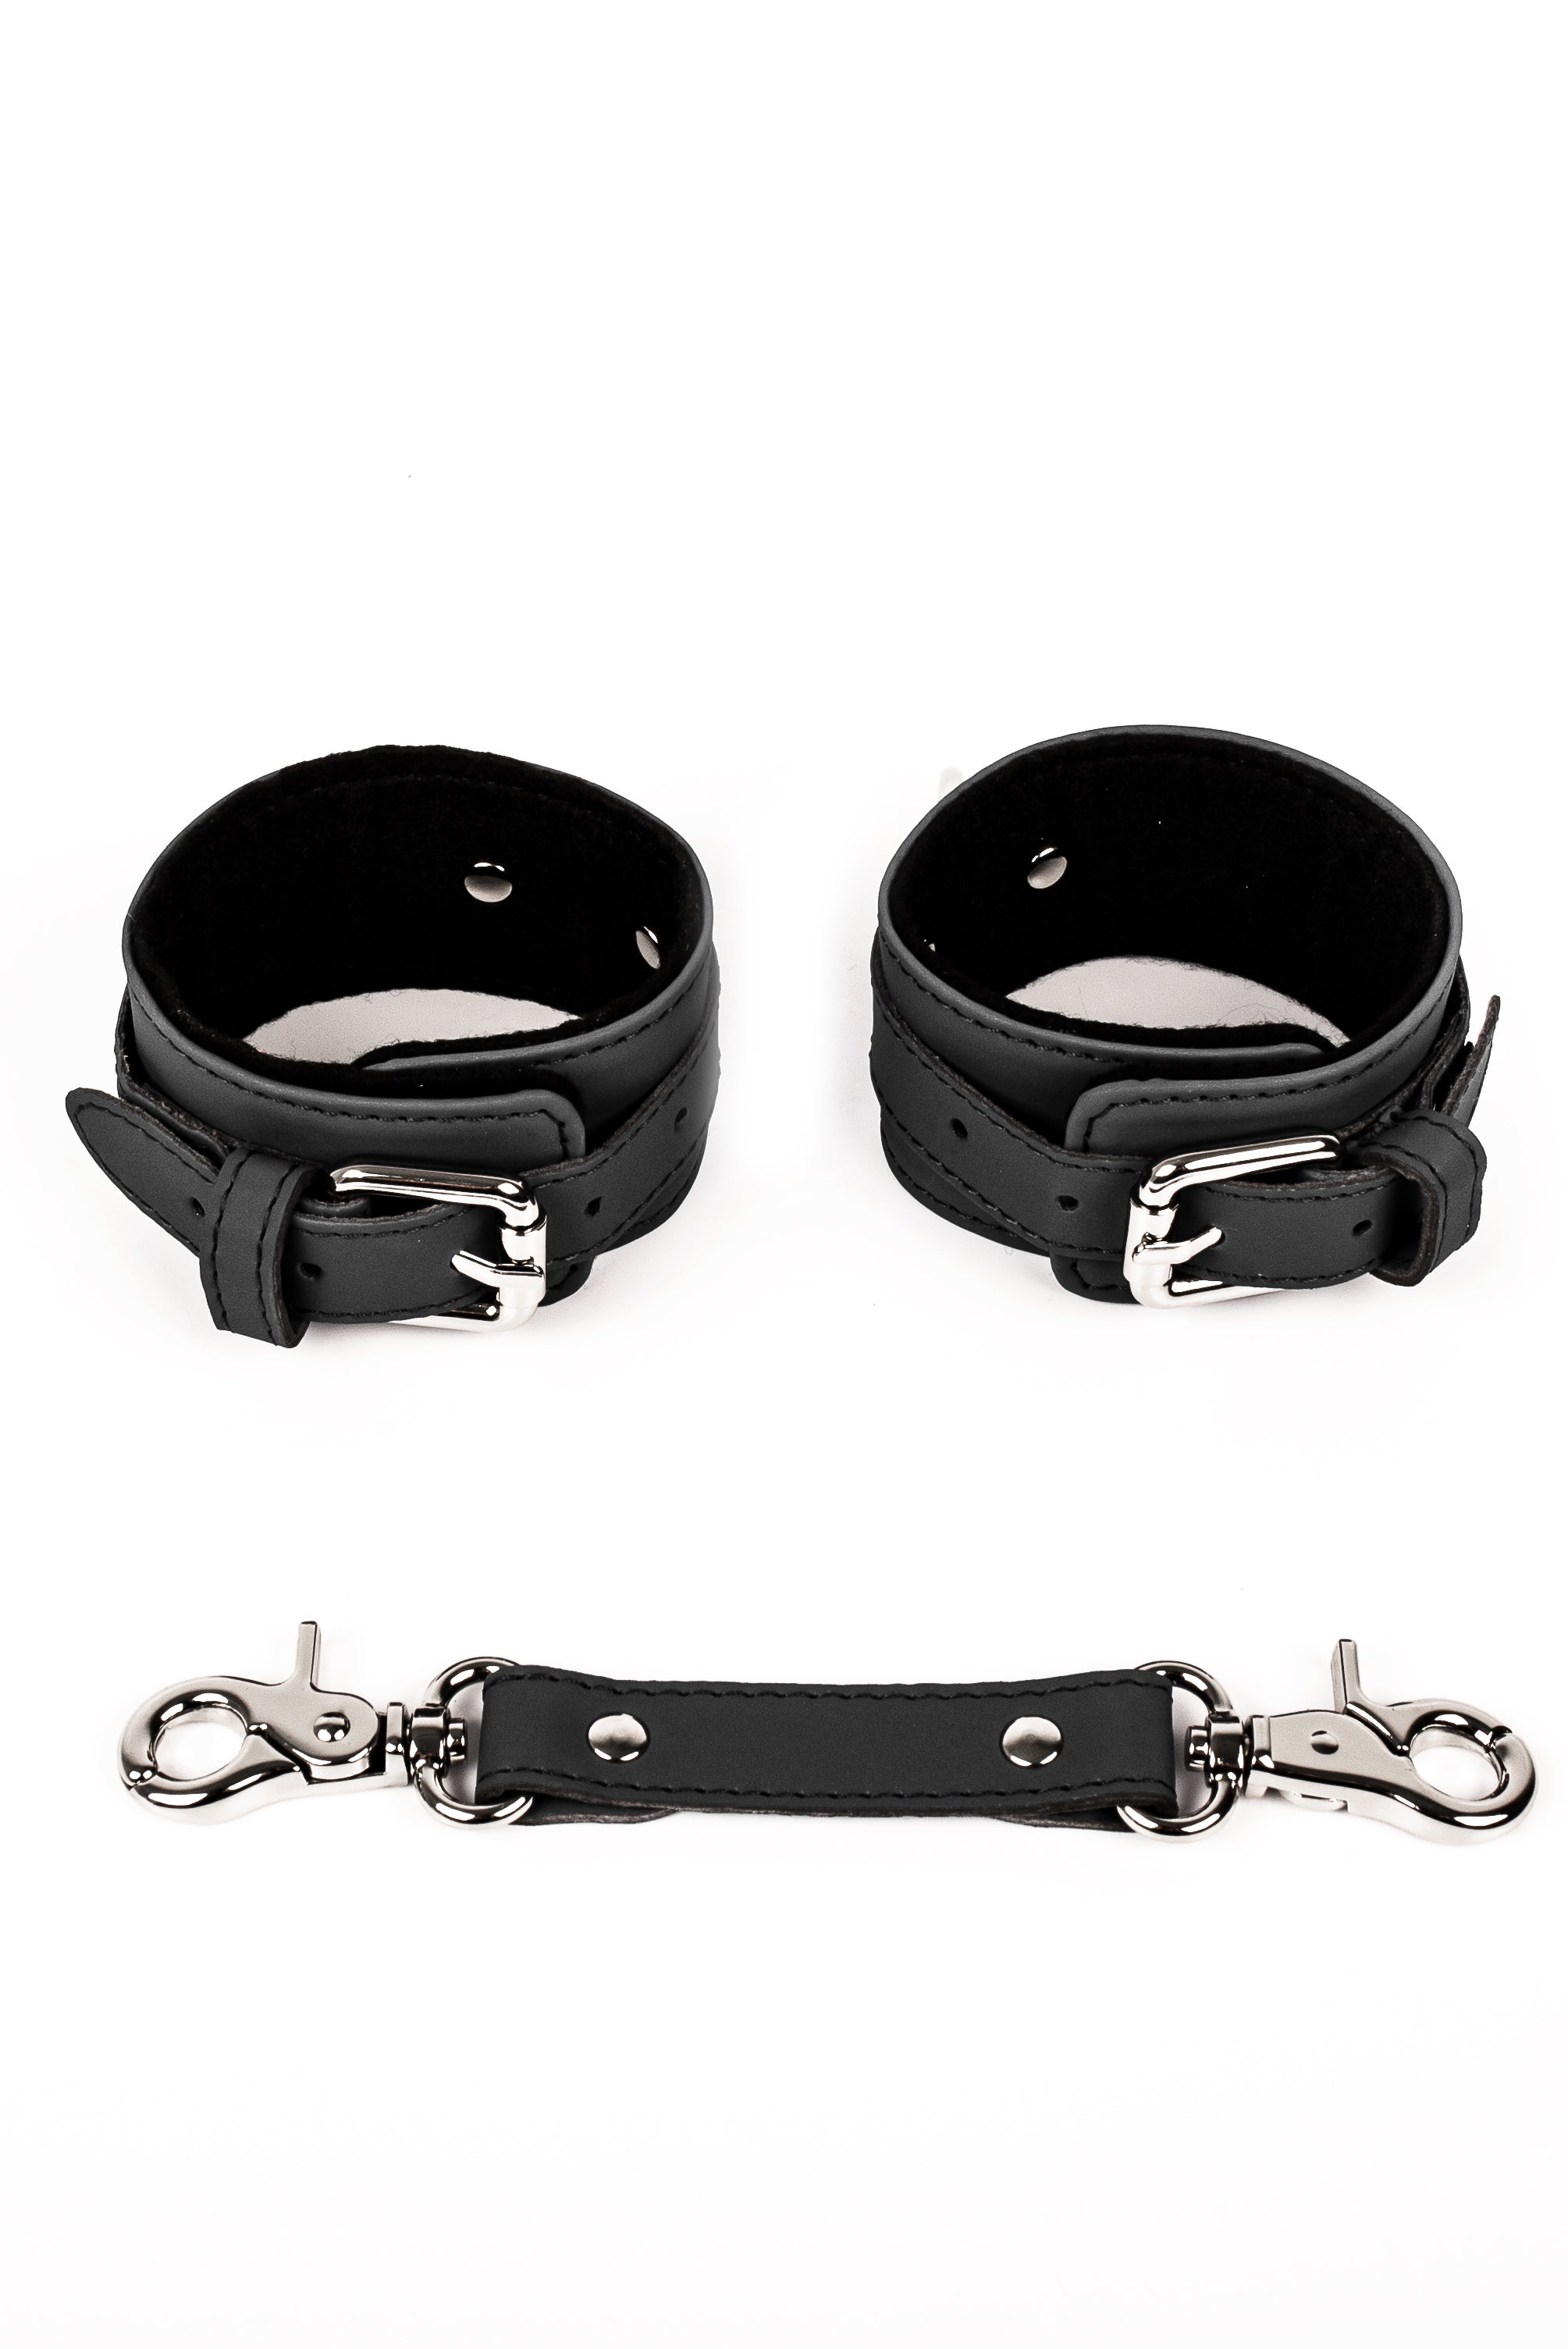 Vegan Leather Wrist/Ankle cuffs. 5 colors